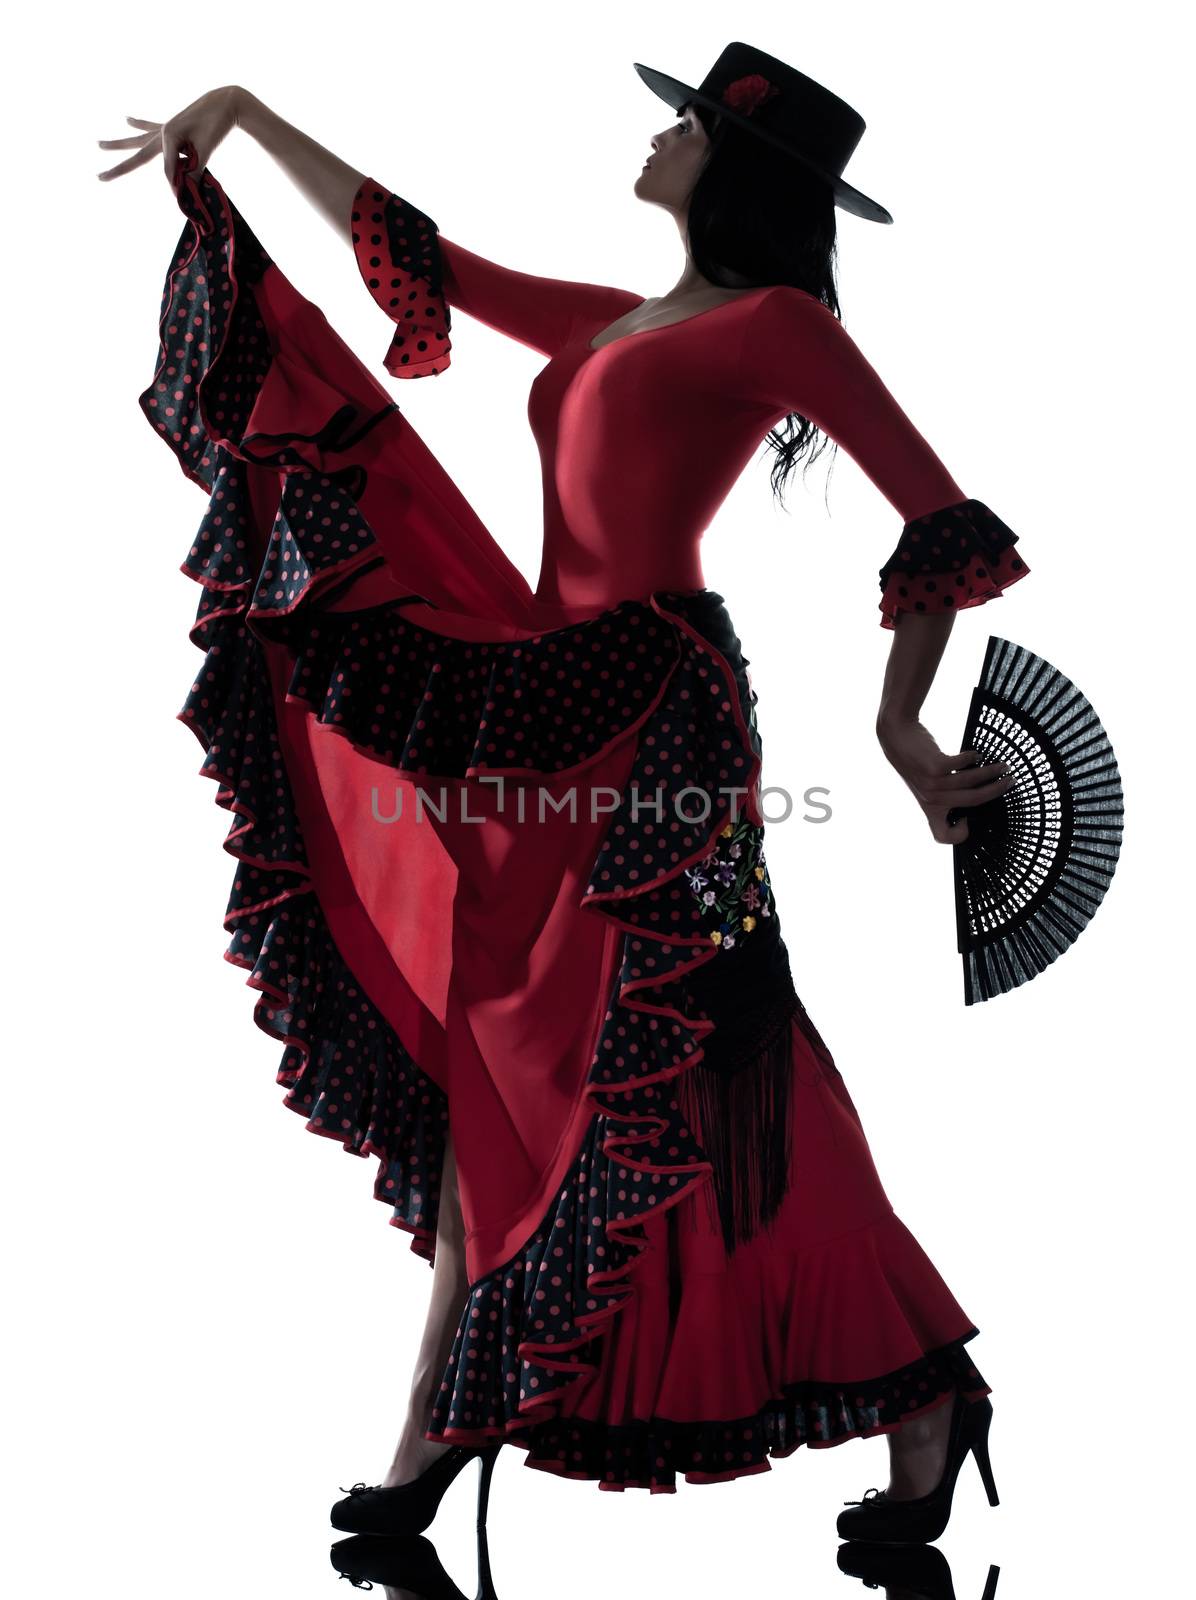 one woman gypsy flamenco dancing dancer on studio isolated white background